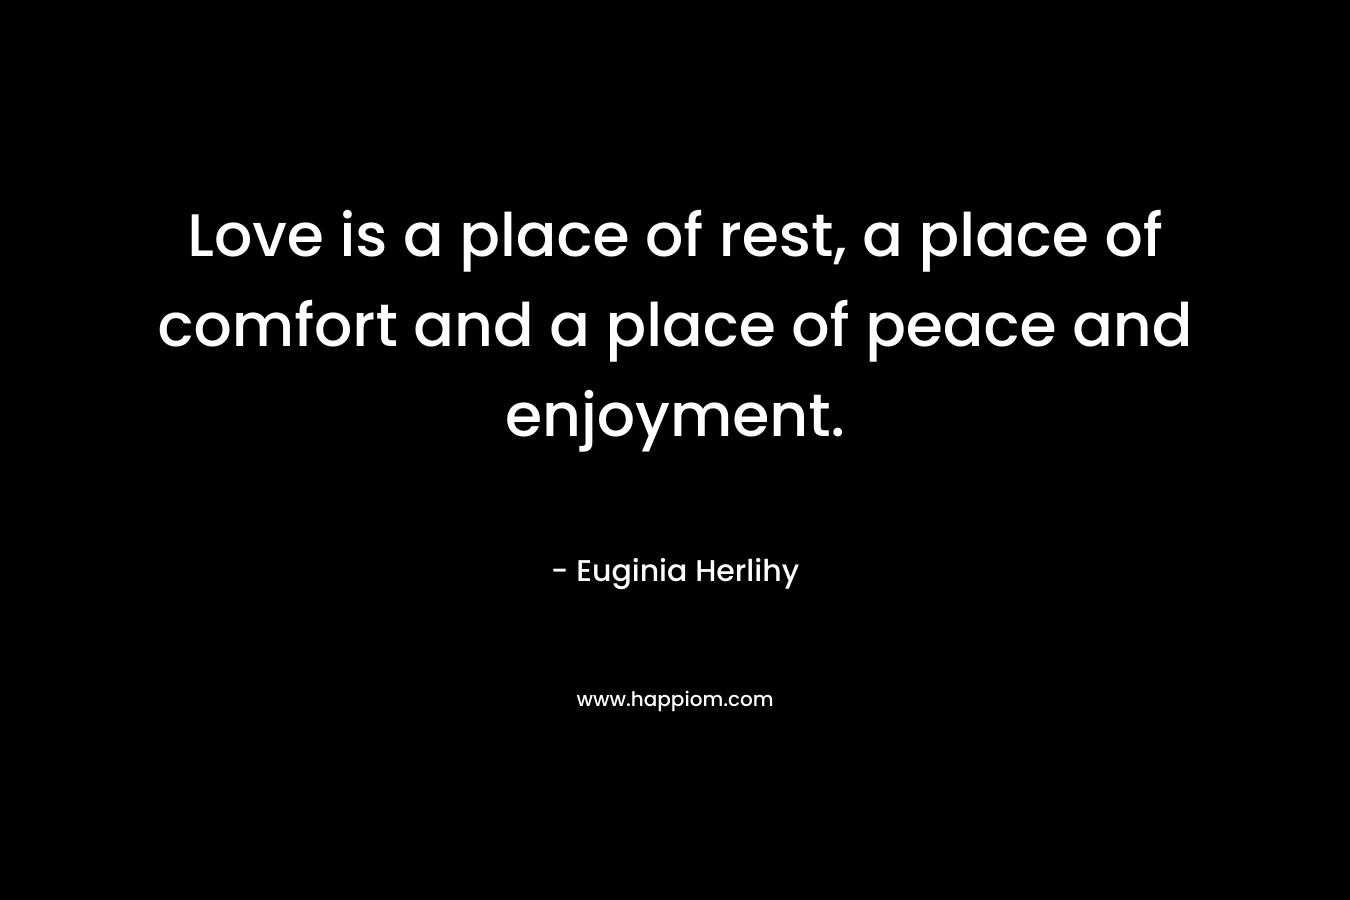 Love is a place of rest, a place of comfort and a place of peace and enjoyment.